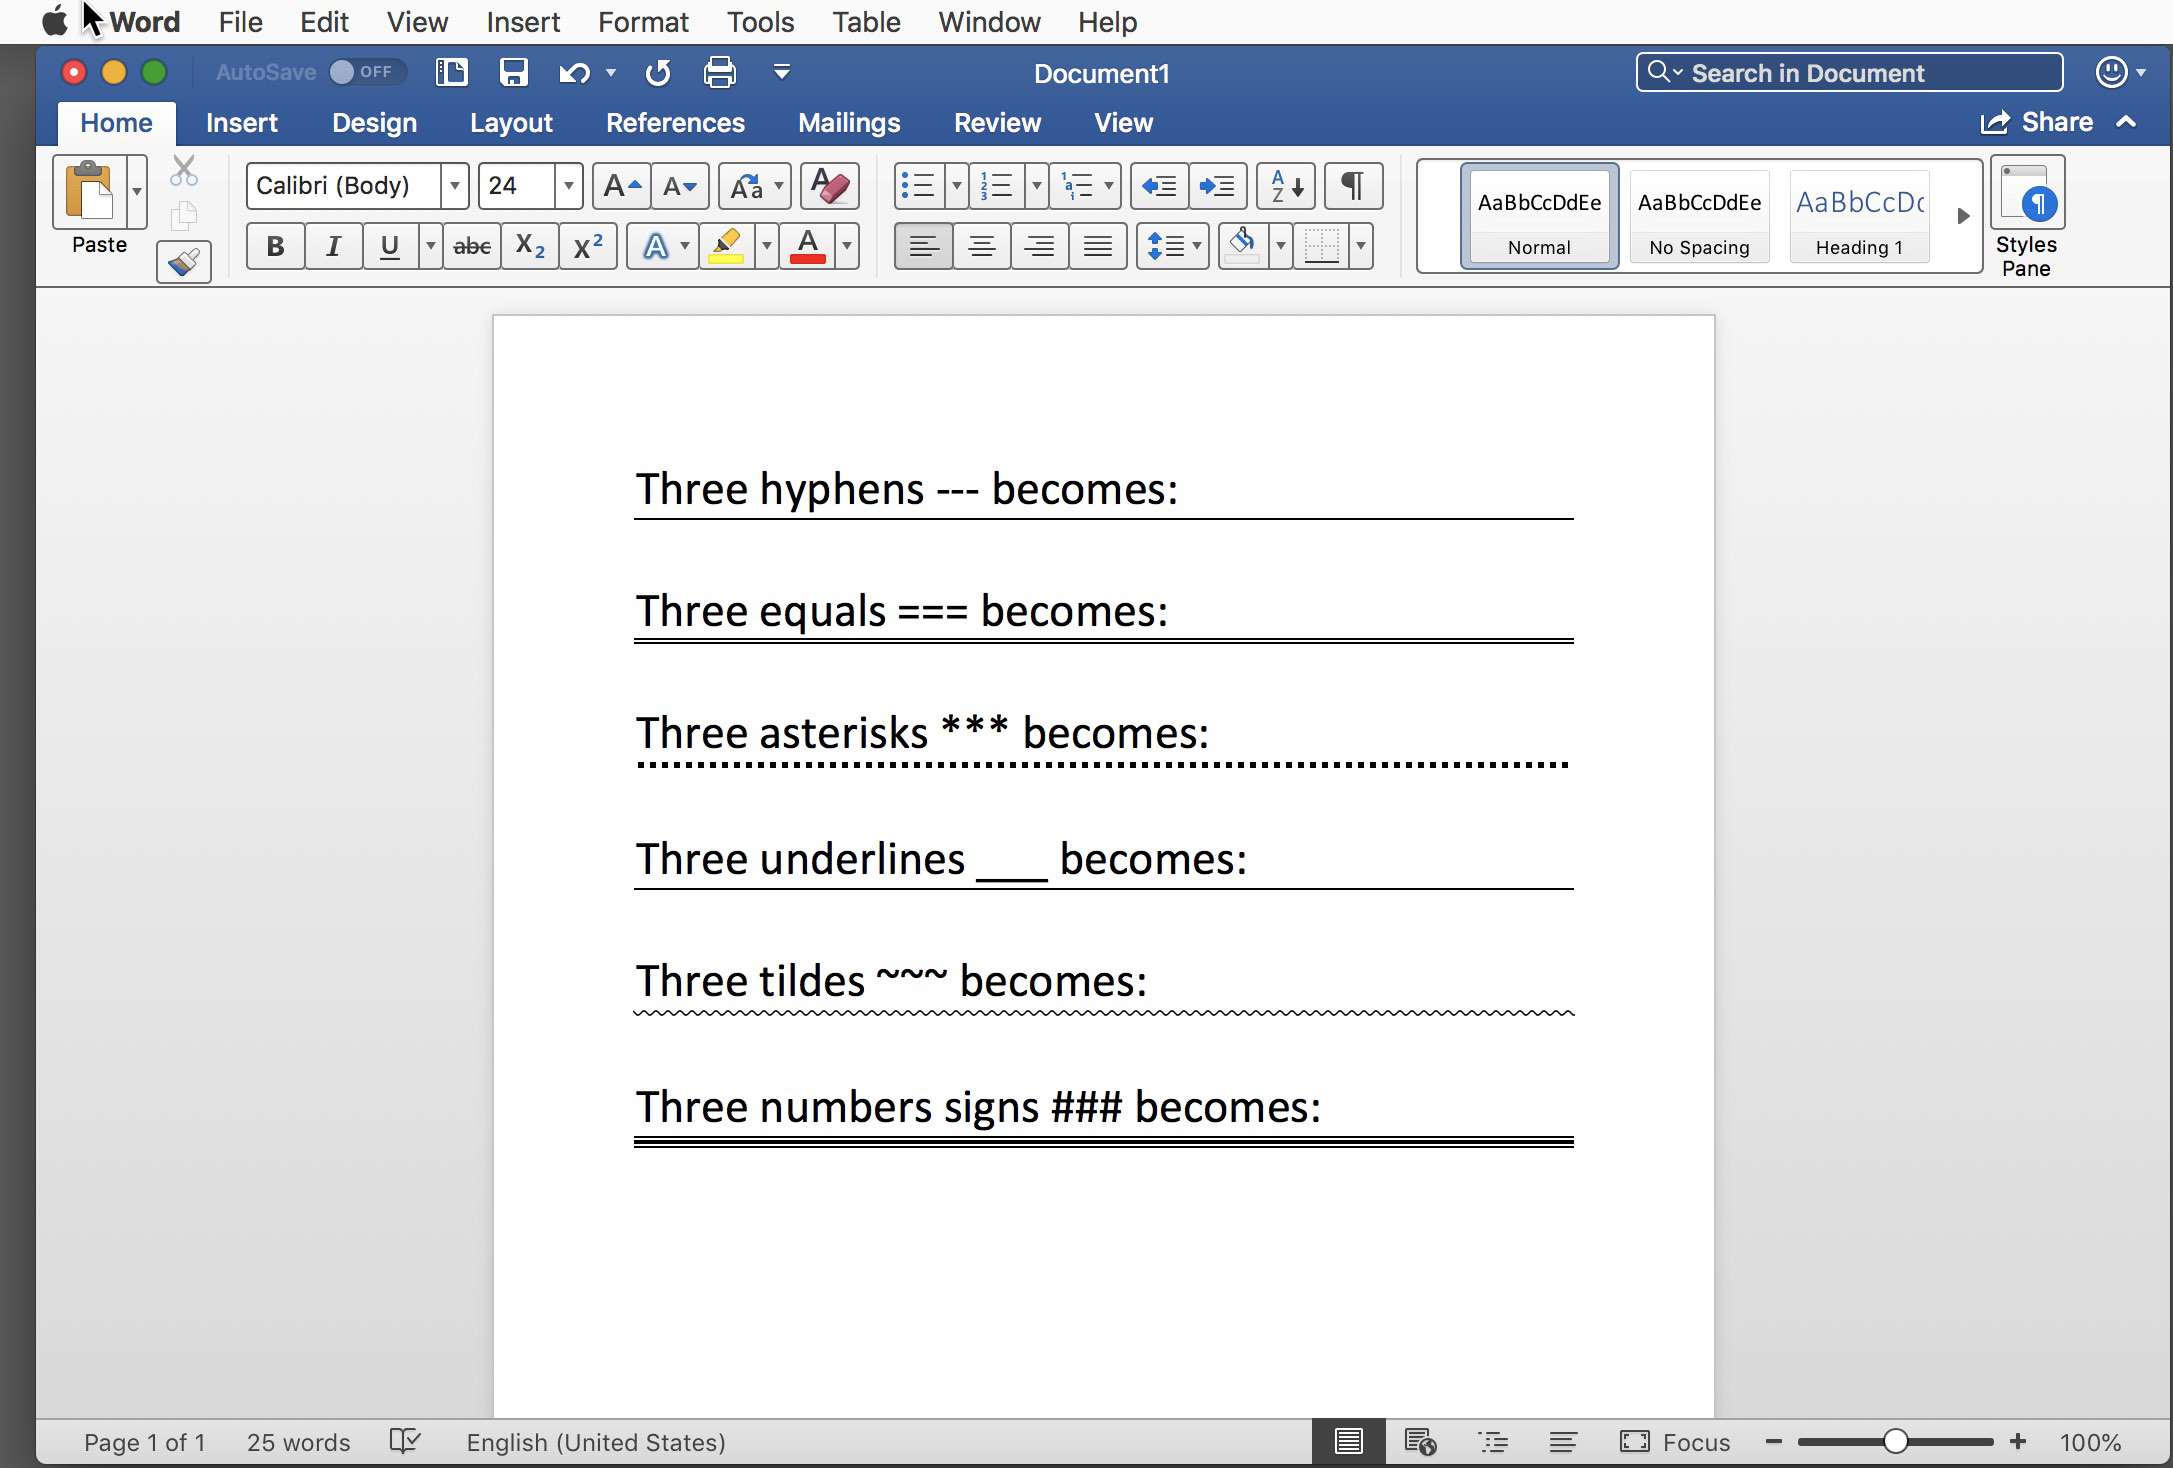 How To Insert Blank Lines In Word - fasrip